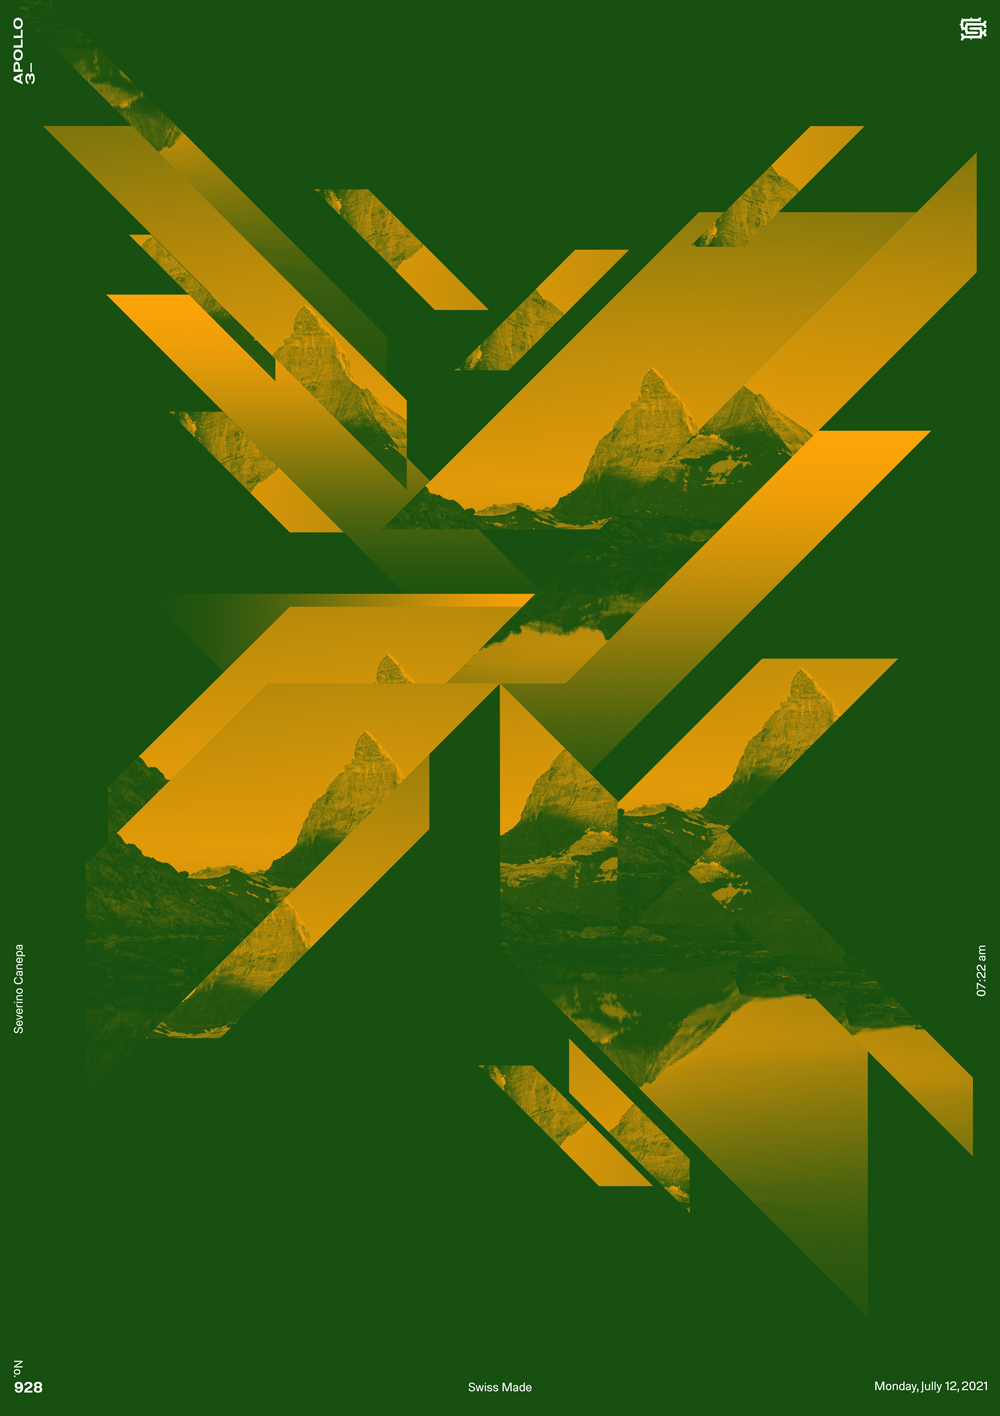 Visual creation made with diagonal shapes with an orange and green gradient map